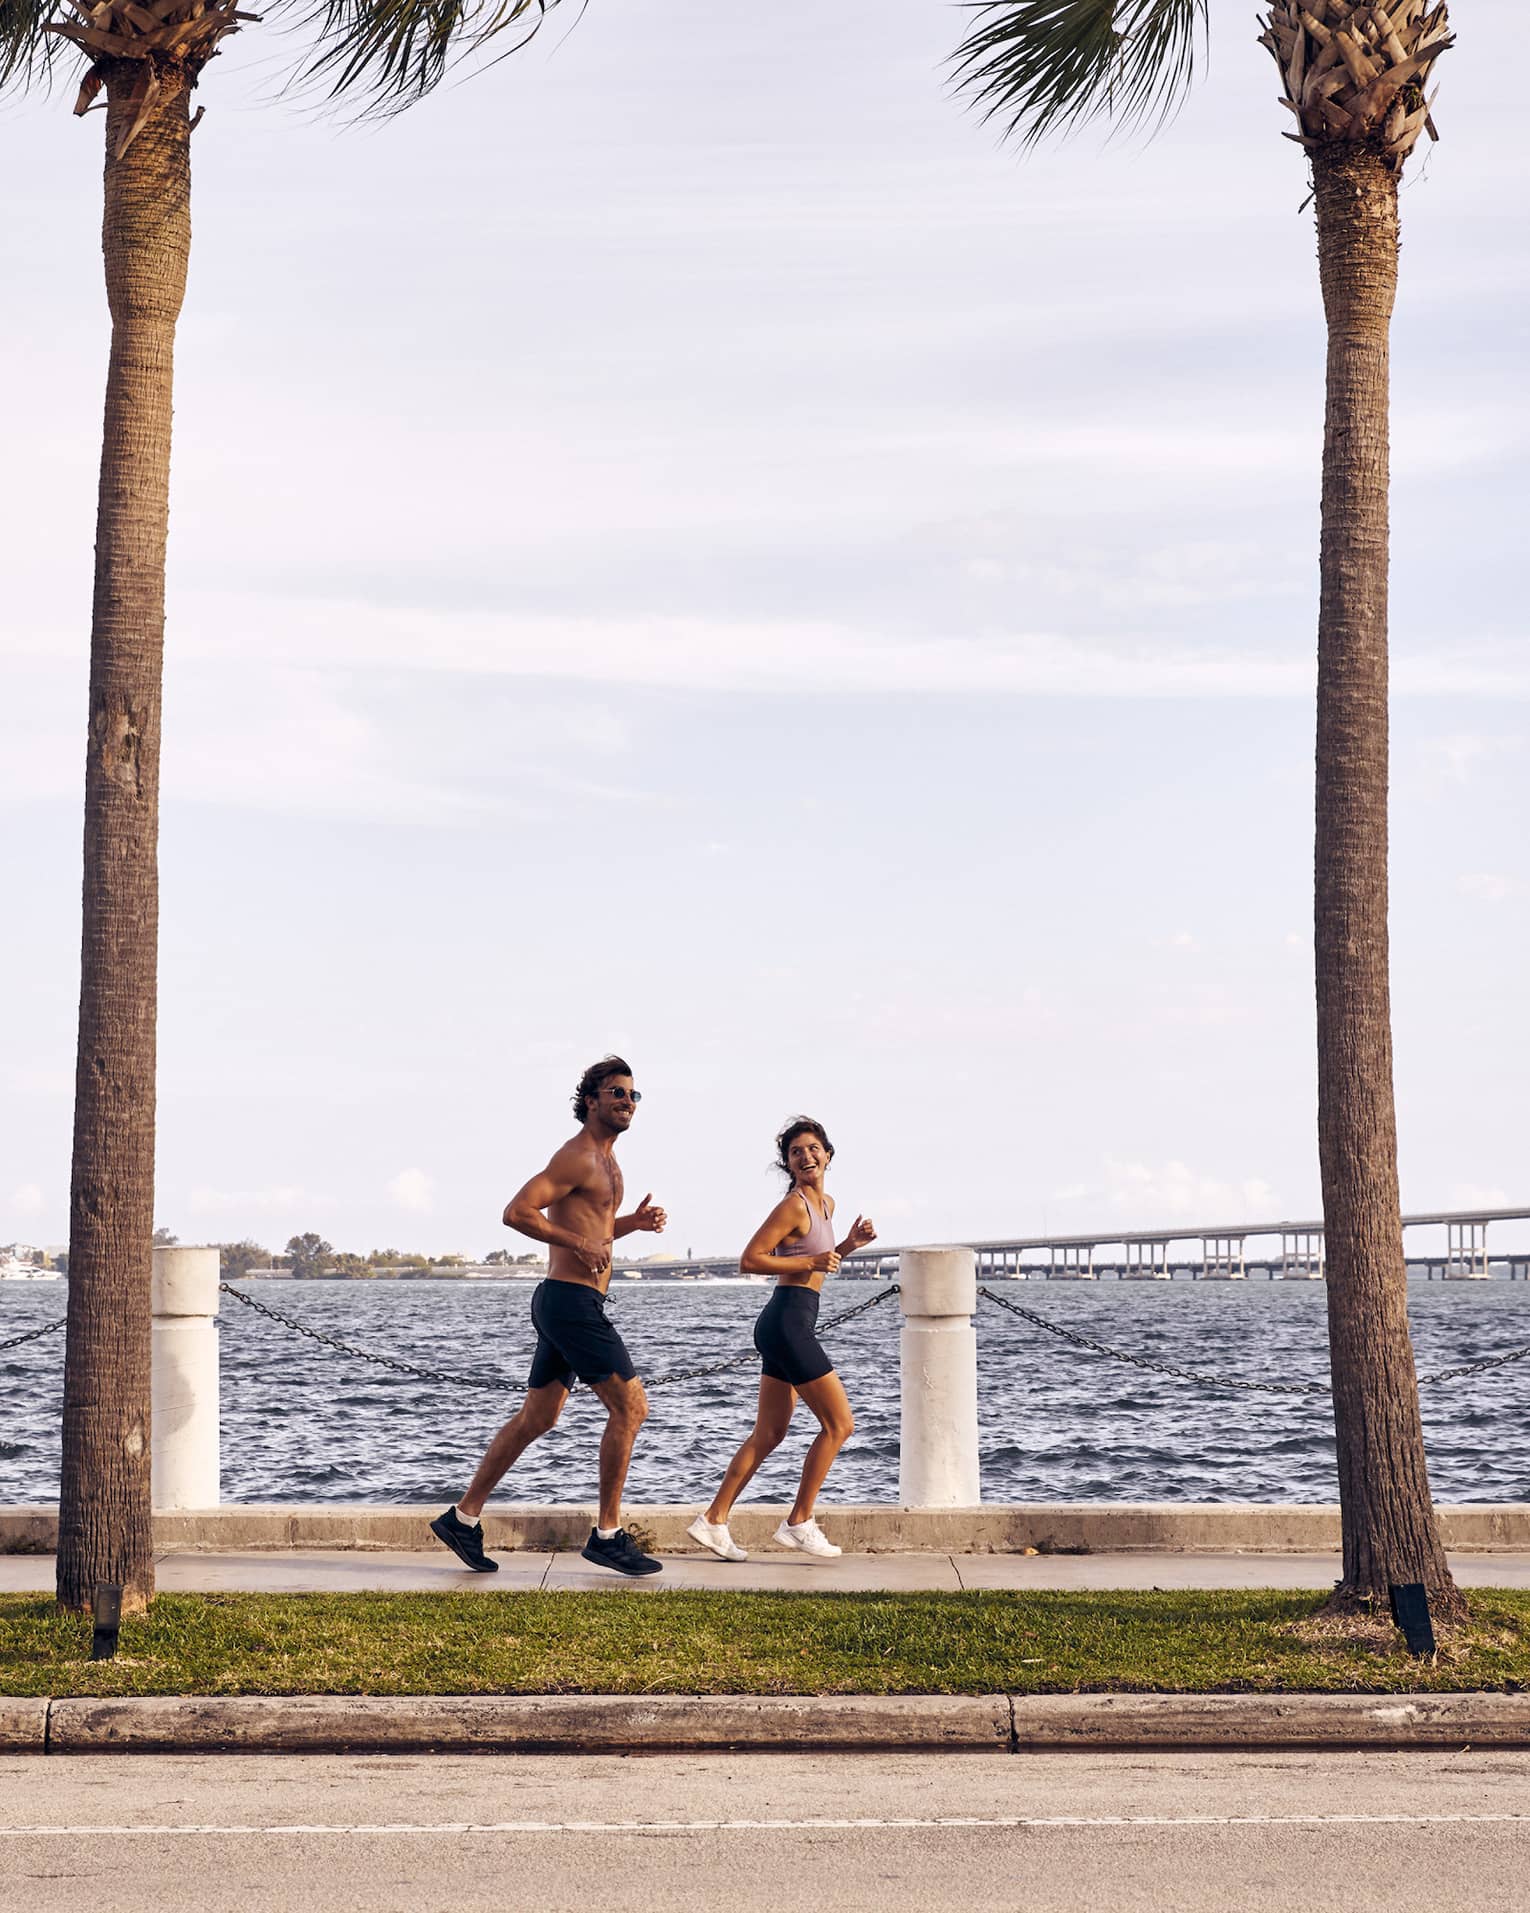 Man and woman running on sidewalk next to water